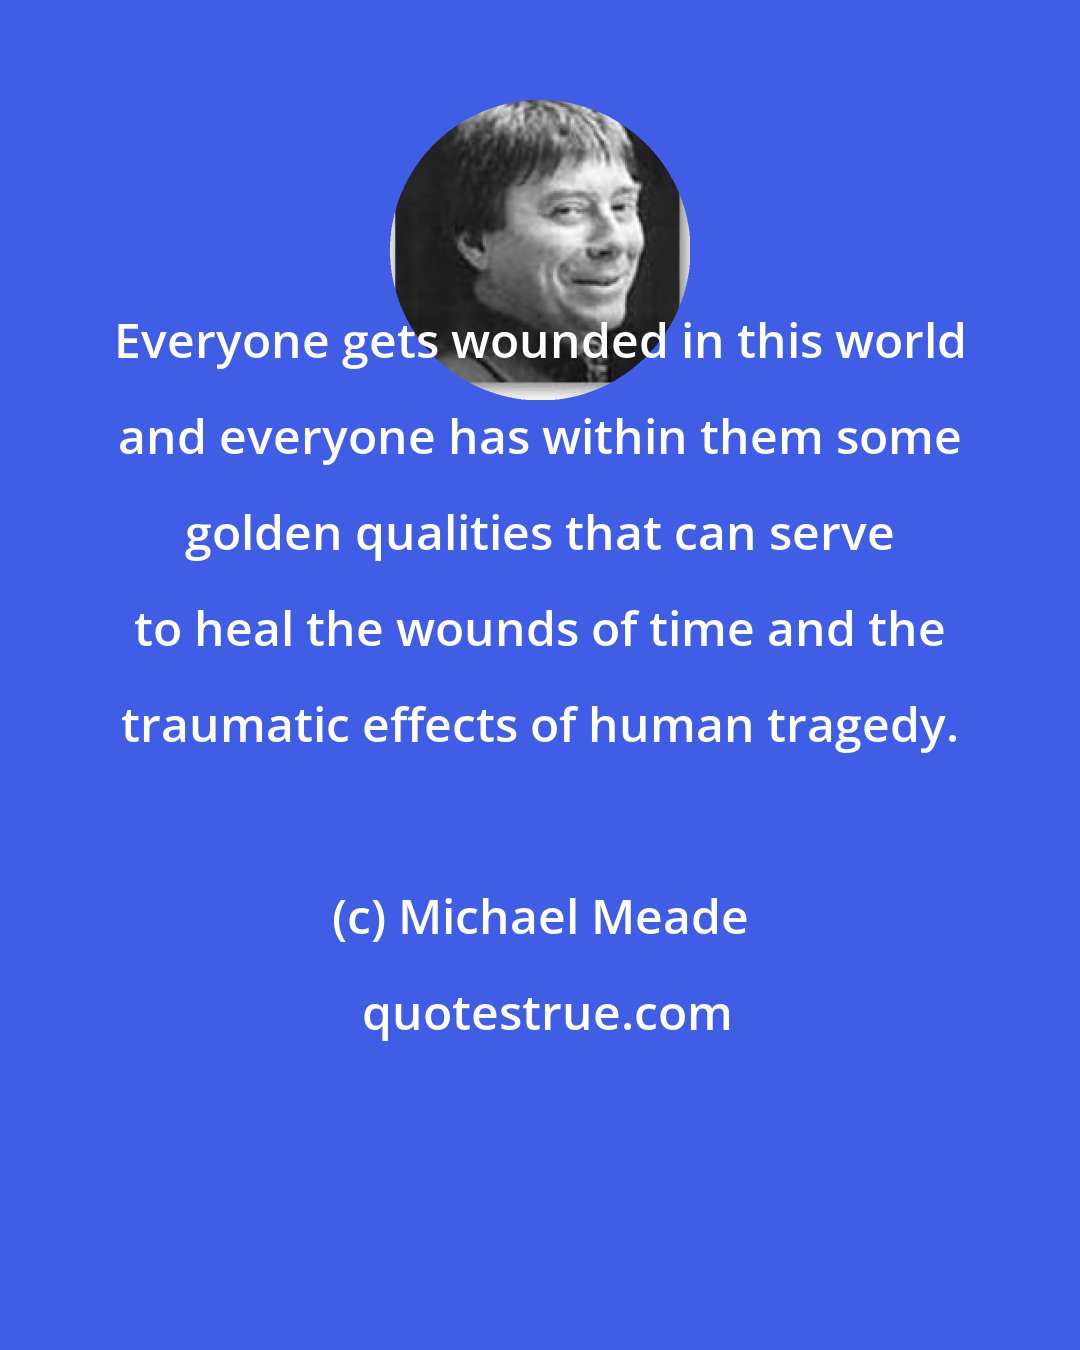 Michael Meade: Everyone gets wounded in this world and everyone has within them some golden qualities that can serve to heal the wounds of time and the traumatic effects of human tragedy.